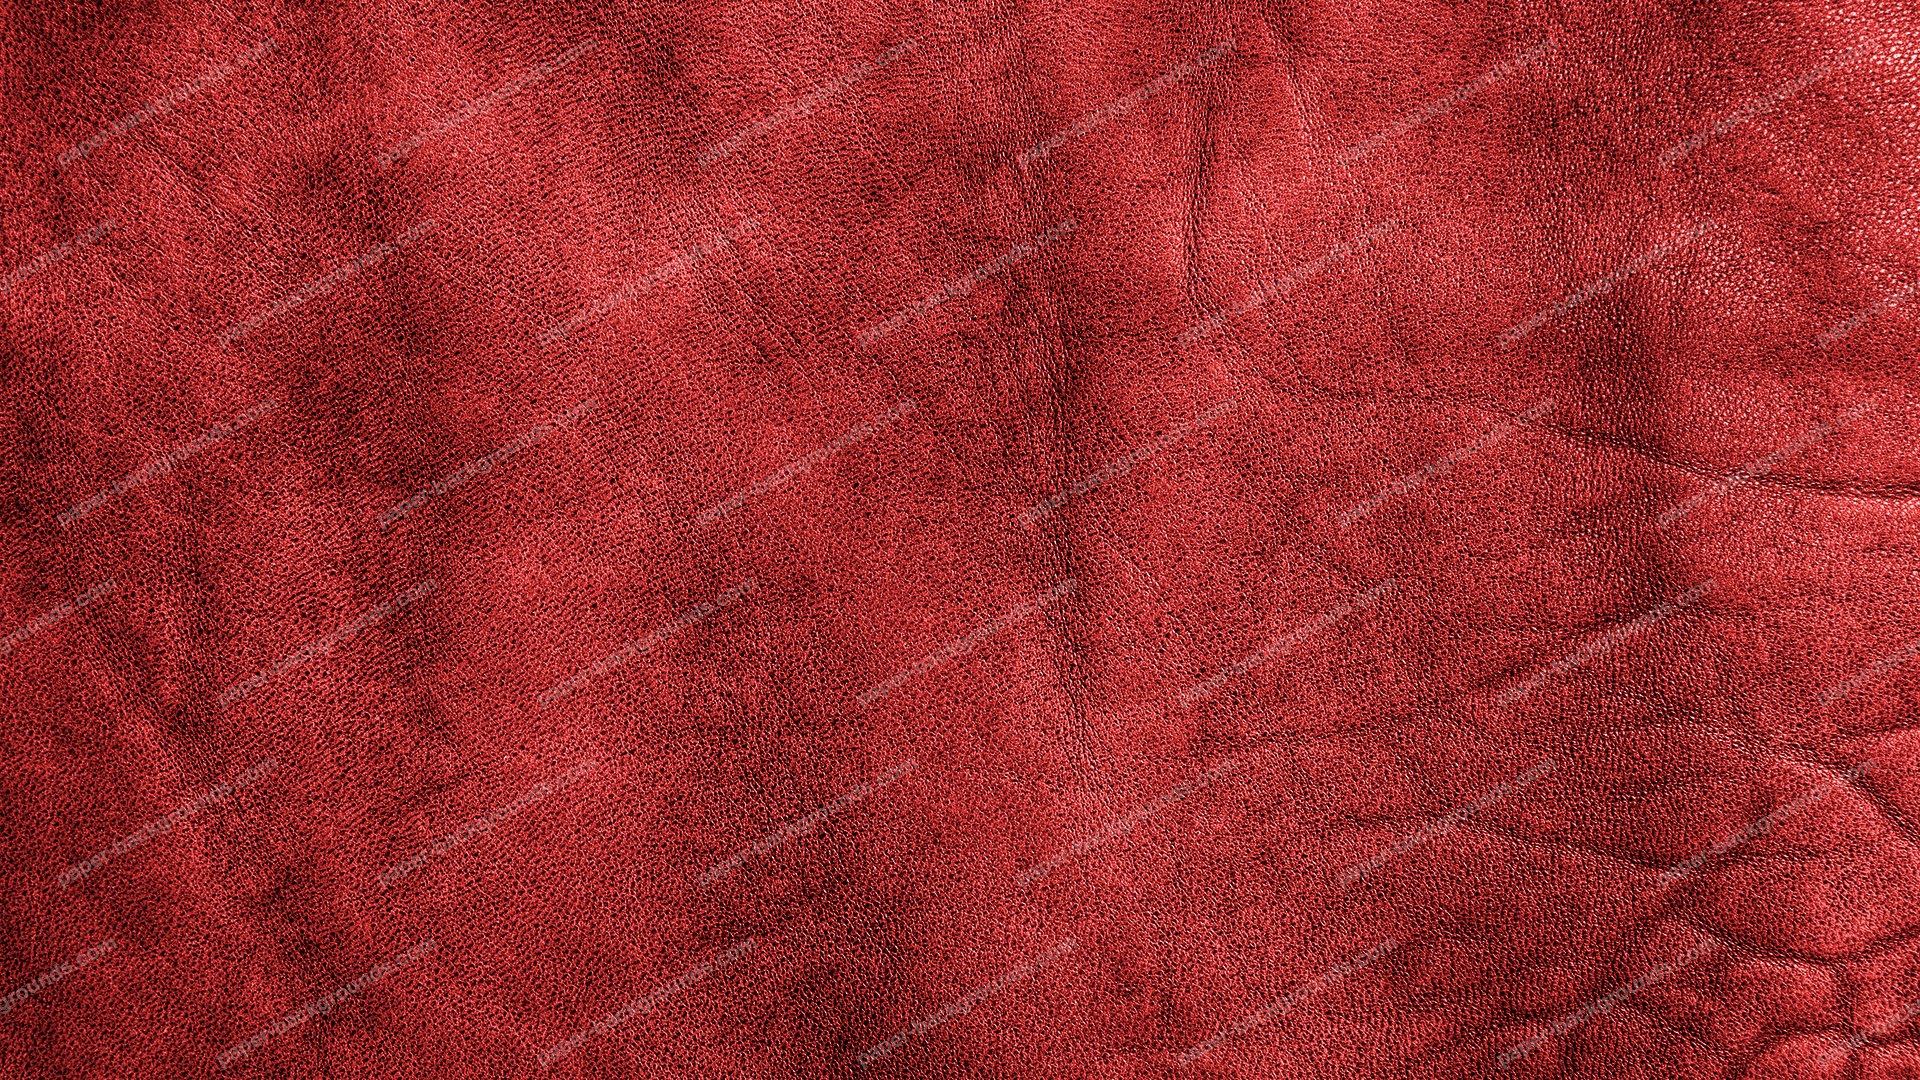 Paper Backgrounds Red Vintage Leather Texture